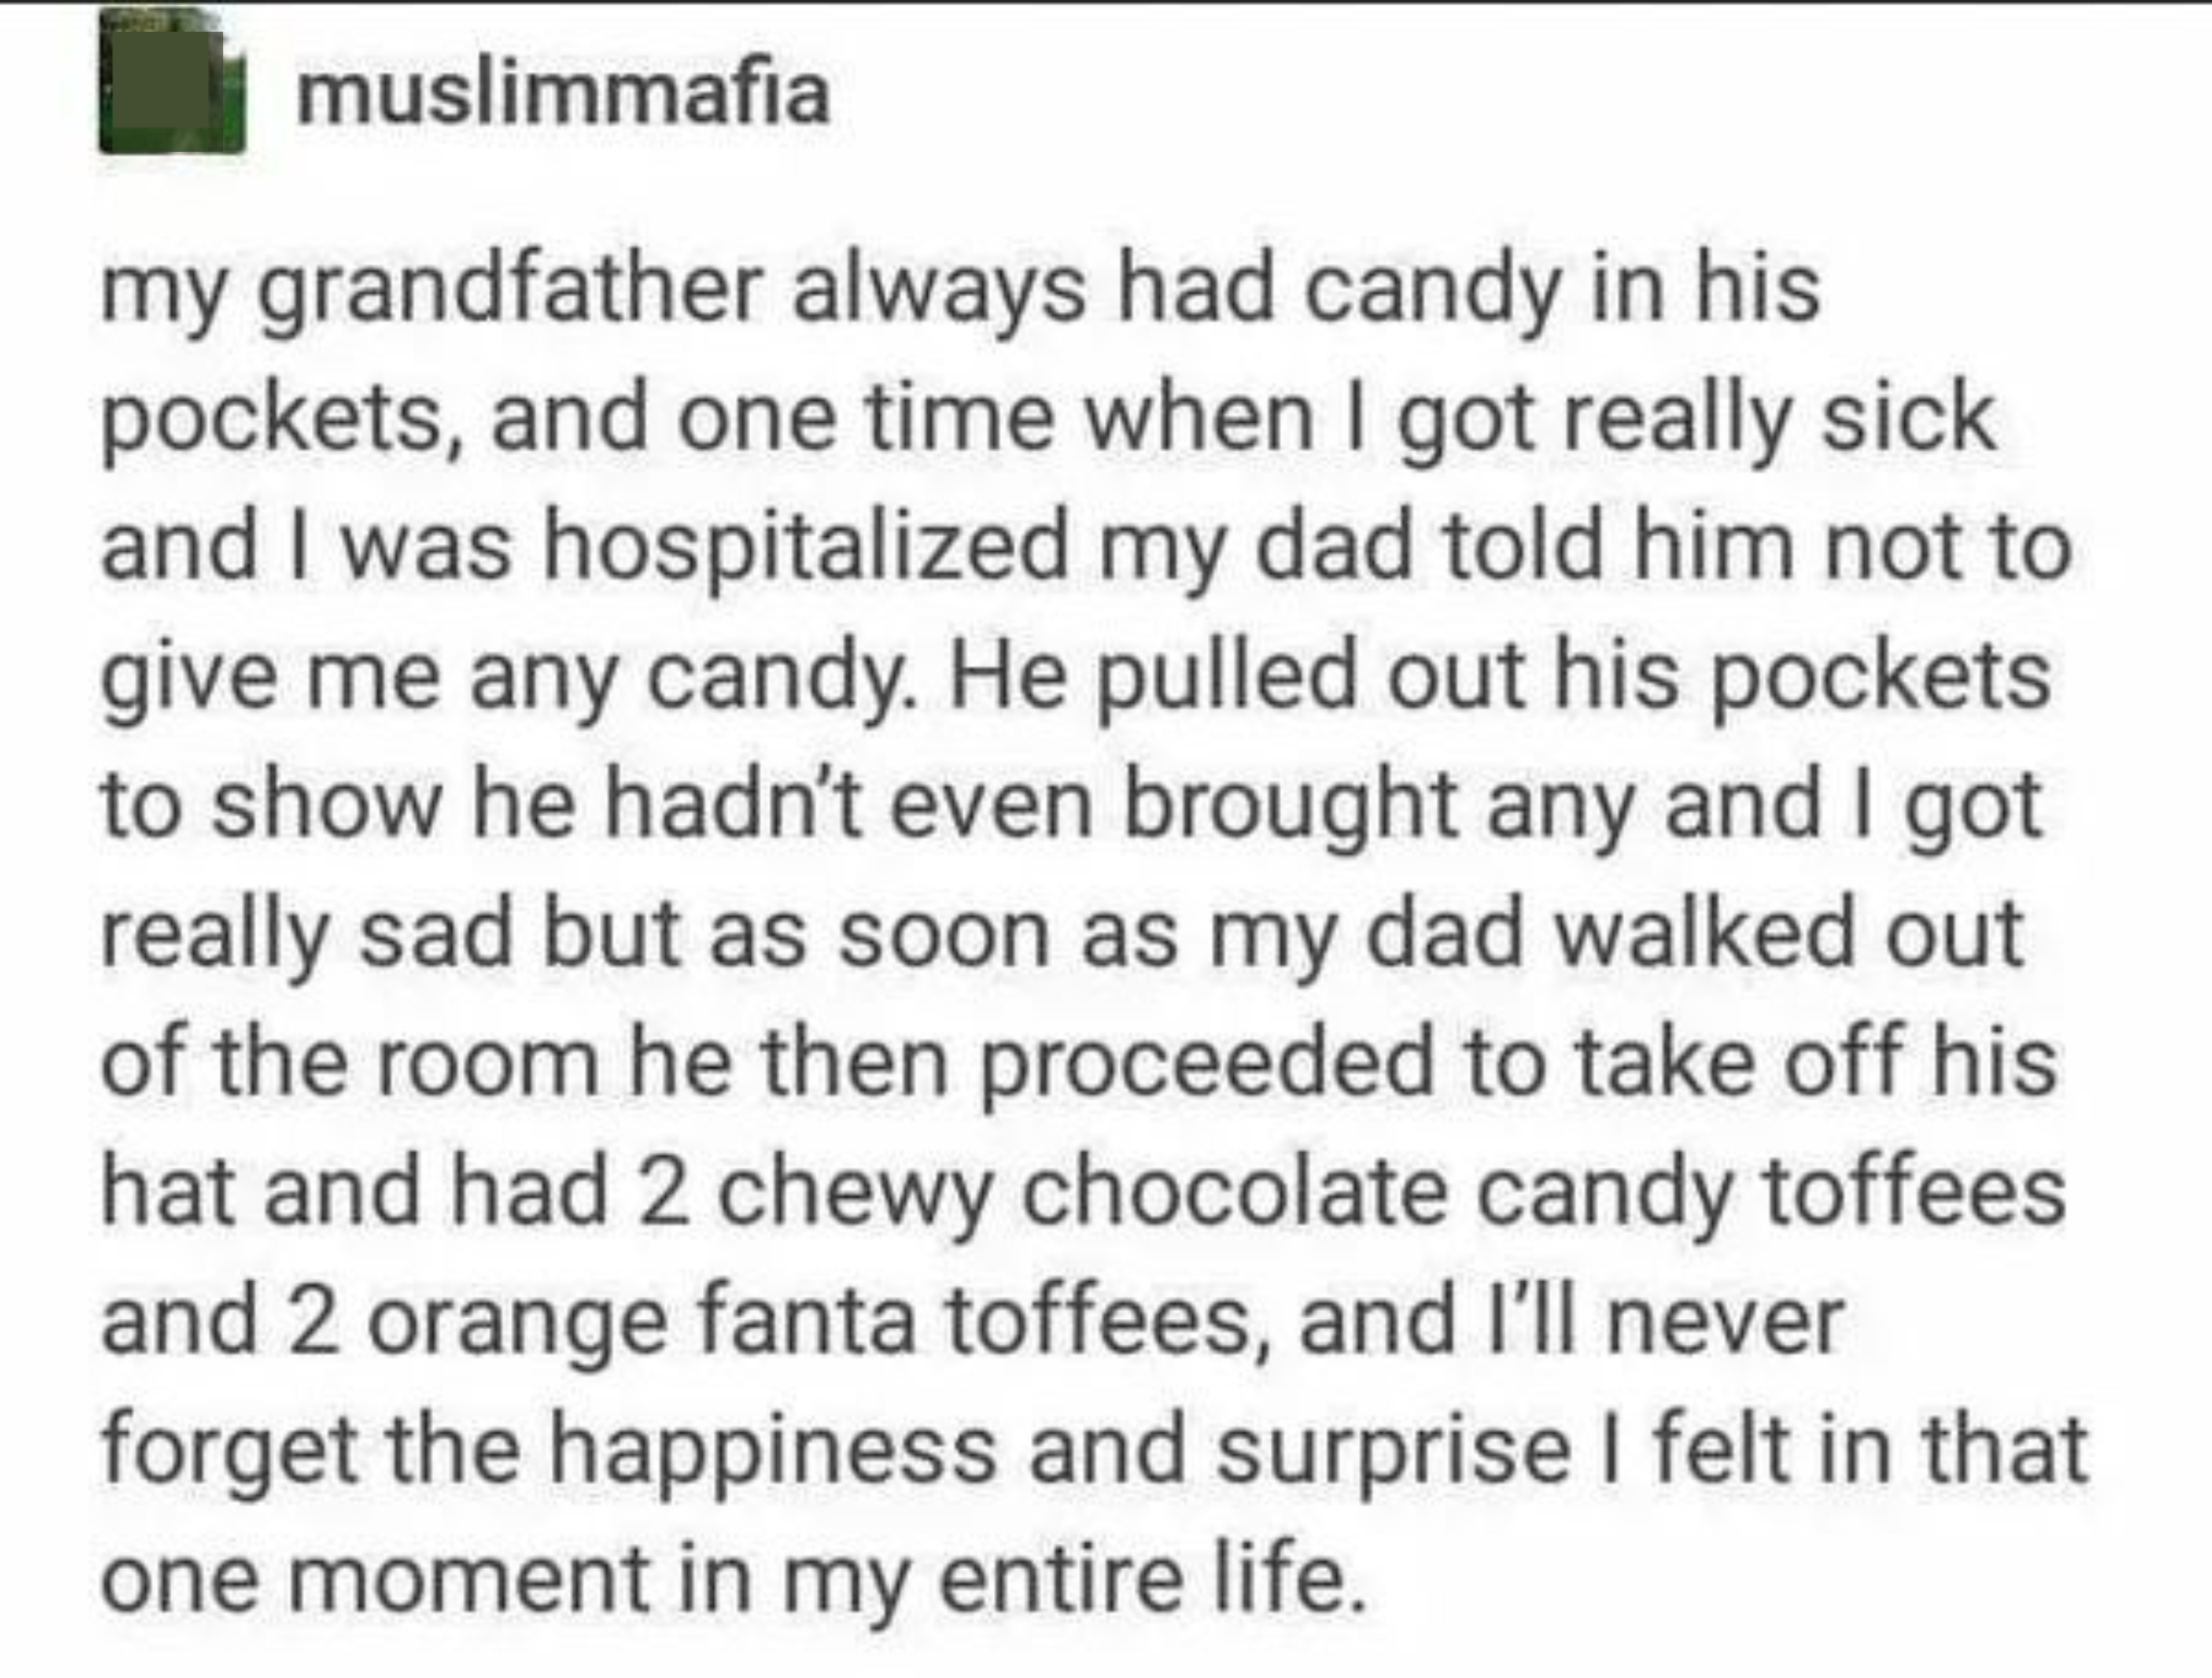 Person recalls how happy they were when they were in hospital as a kid and their dad told their granddad, who always had candy in his pockets, not to give them any; Grandpa showed his empty pockets, but when Dad left, he had chocolate candy inside his hat